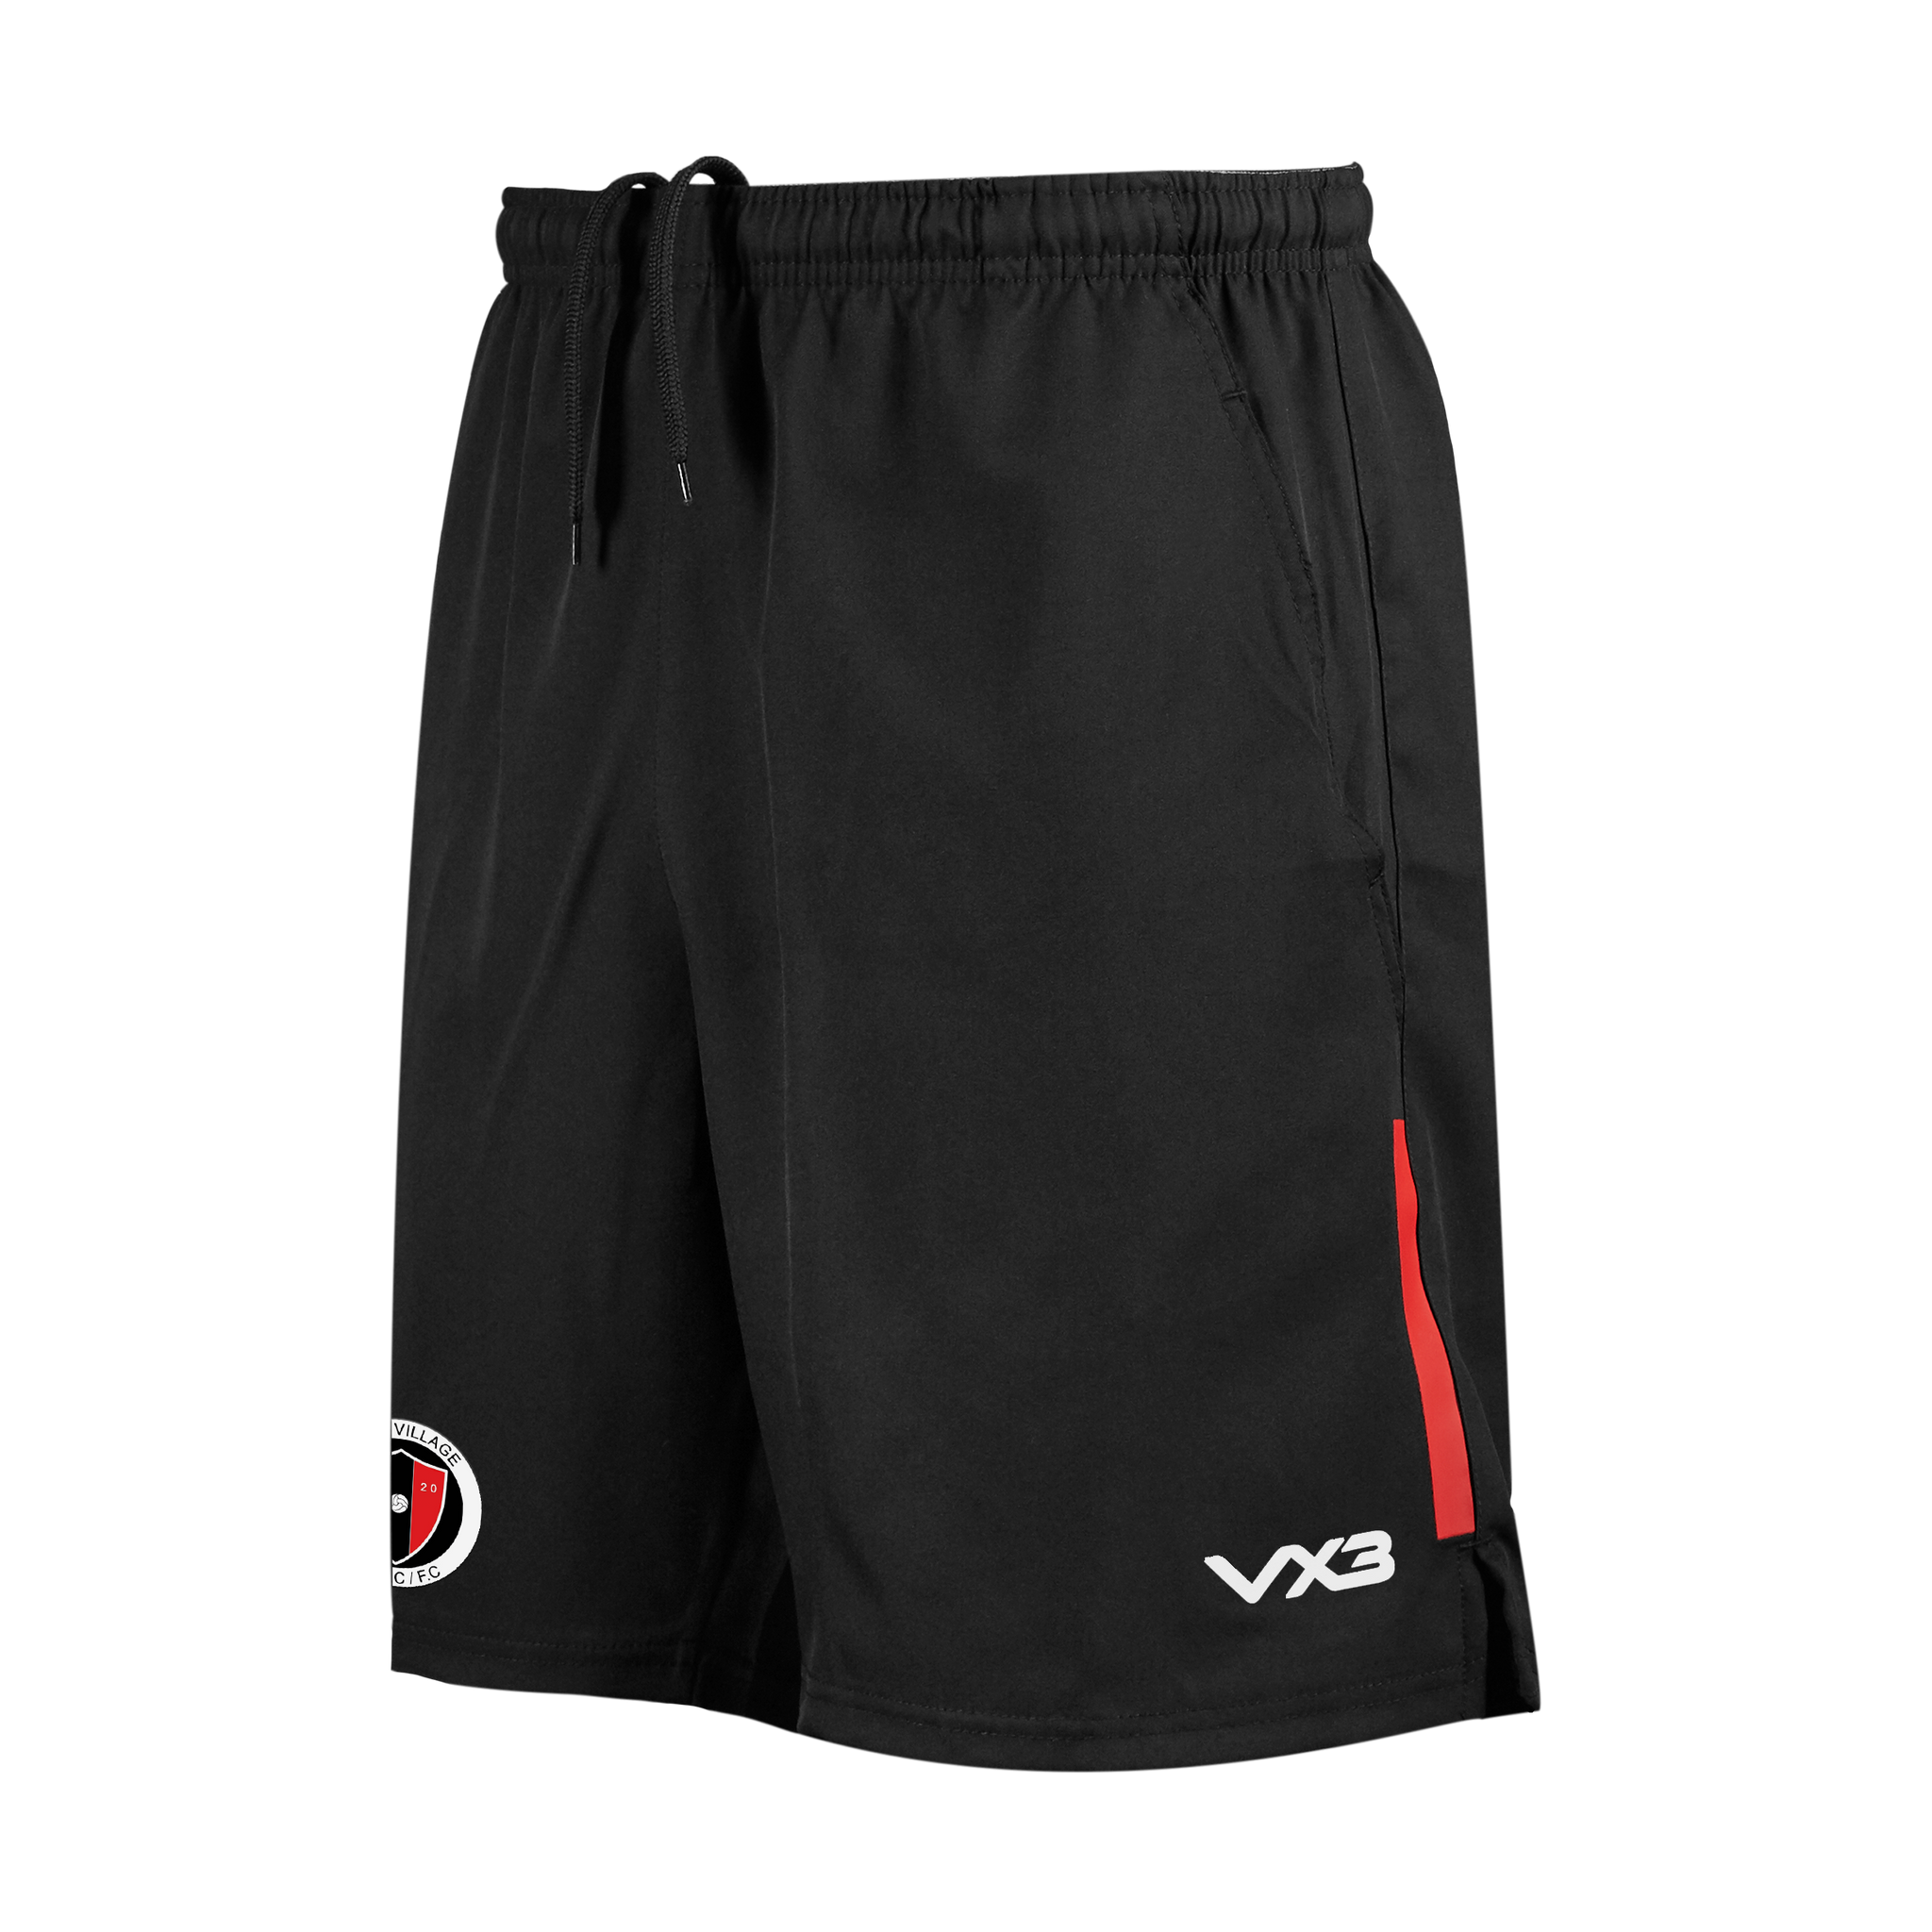 Teign Village FC Fortis Youth Travel Shorts